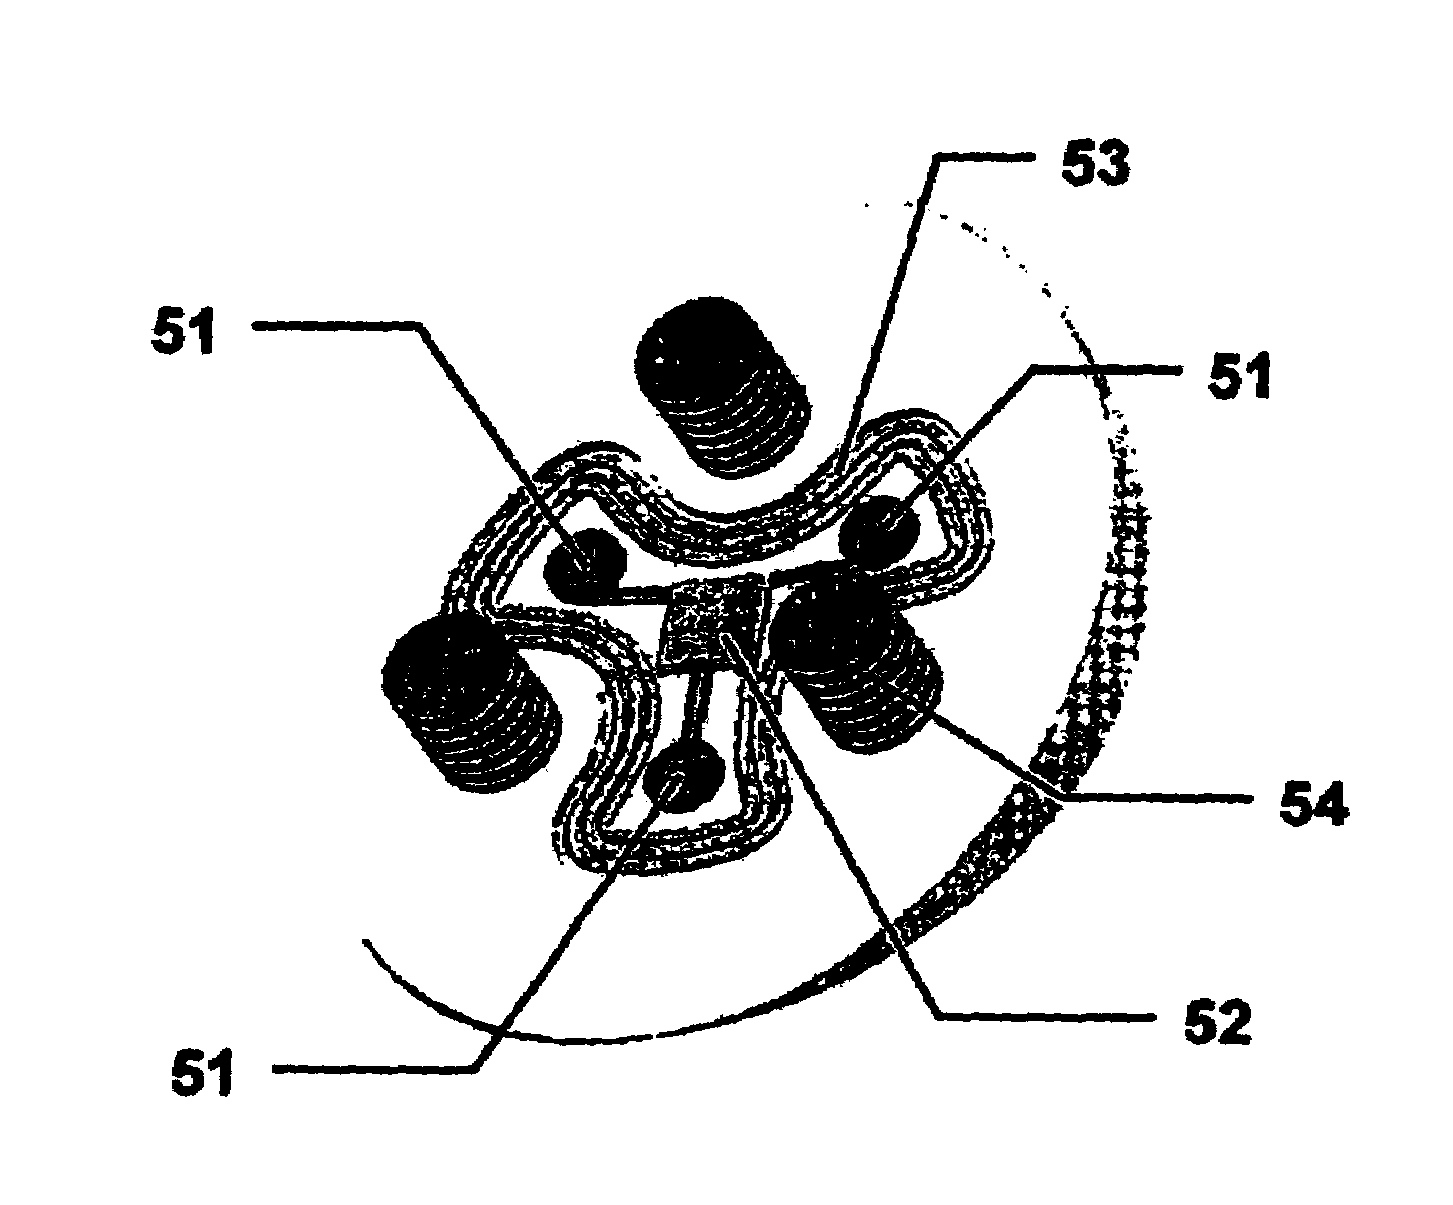 In-vivo orthopedic implant diagnostic device for sensing load, wear, and infection